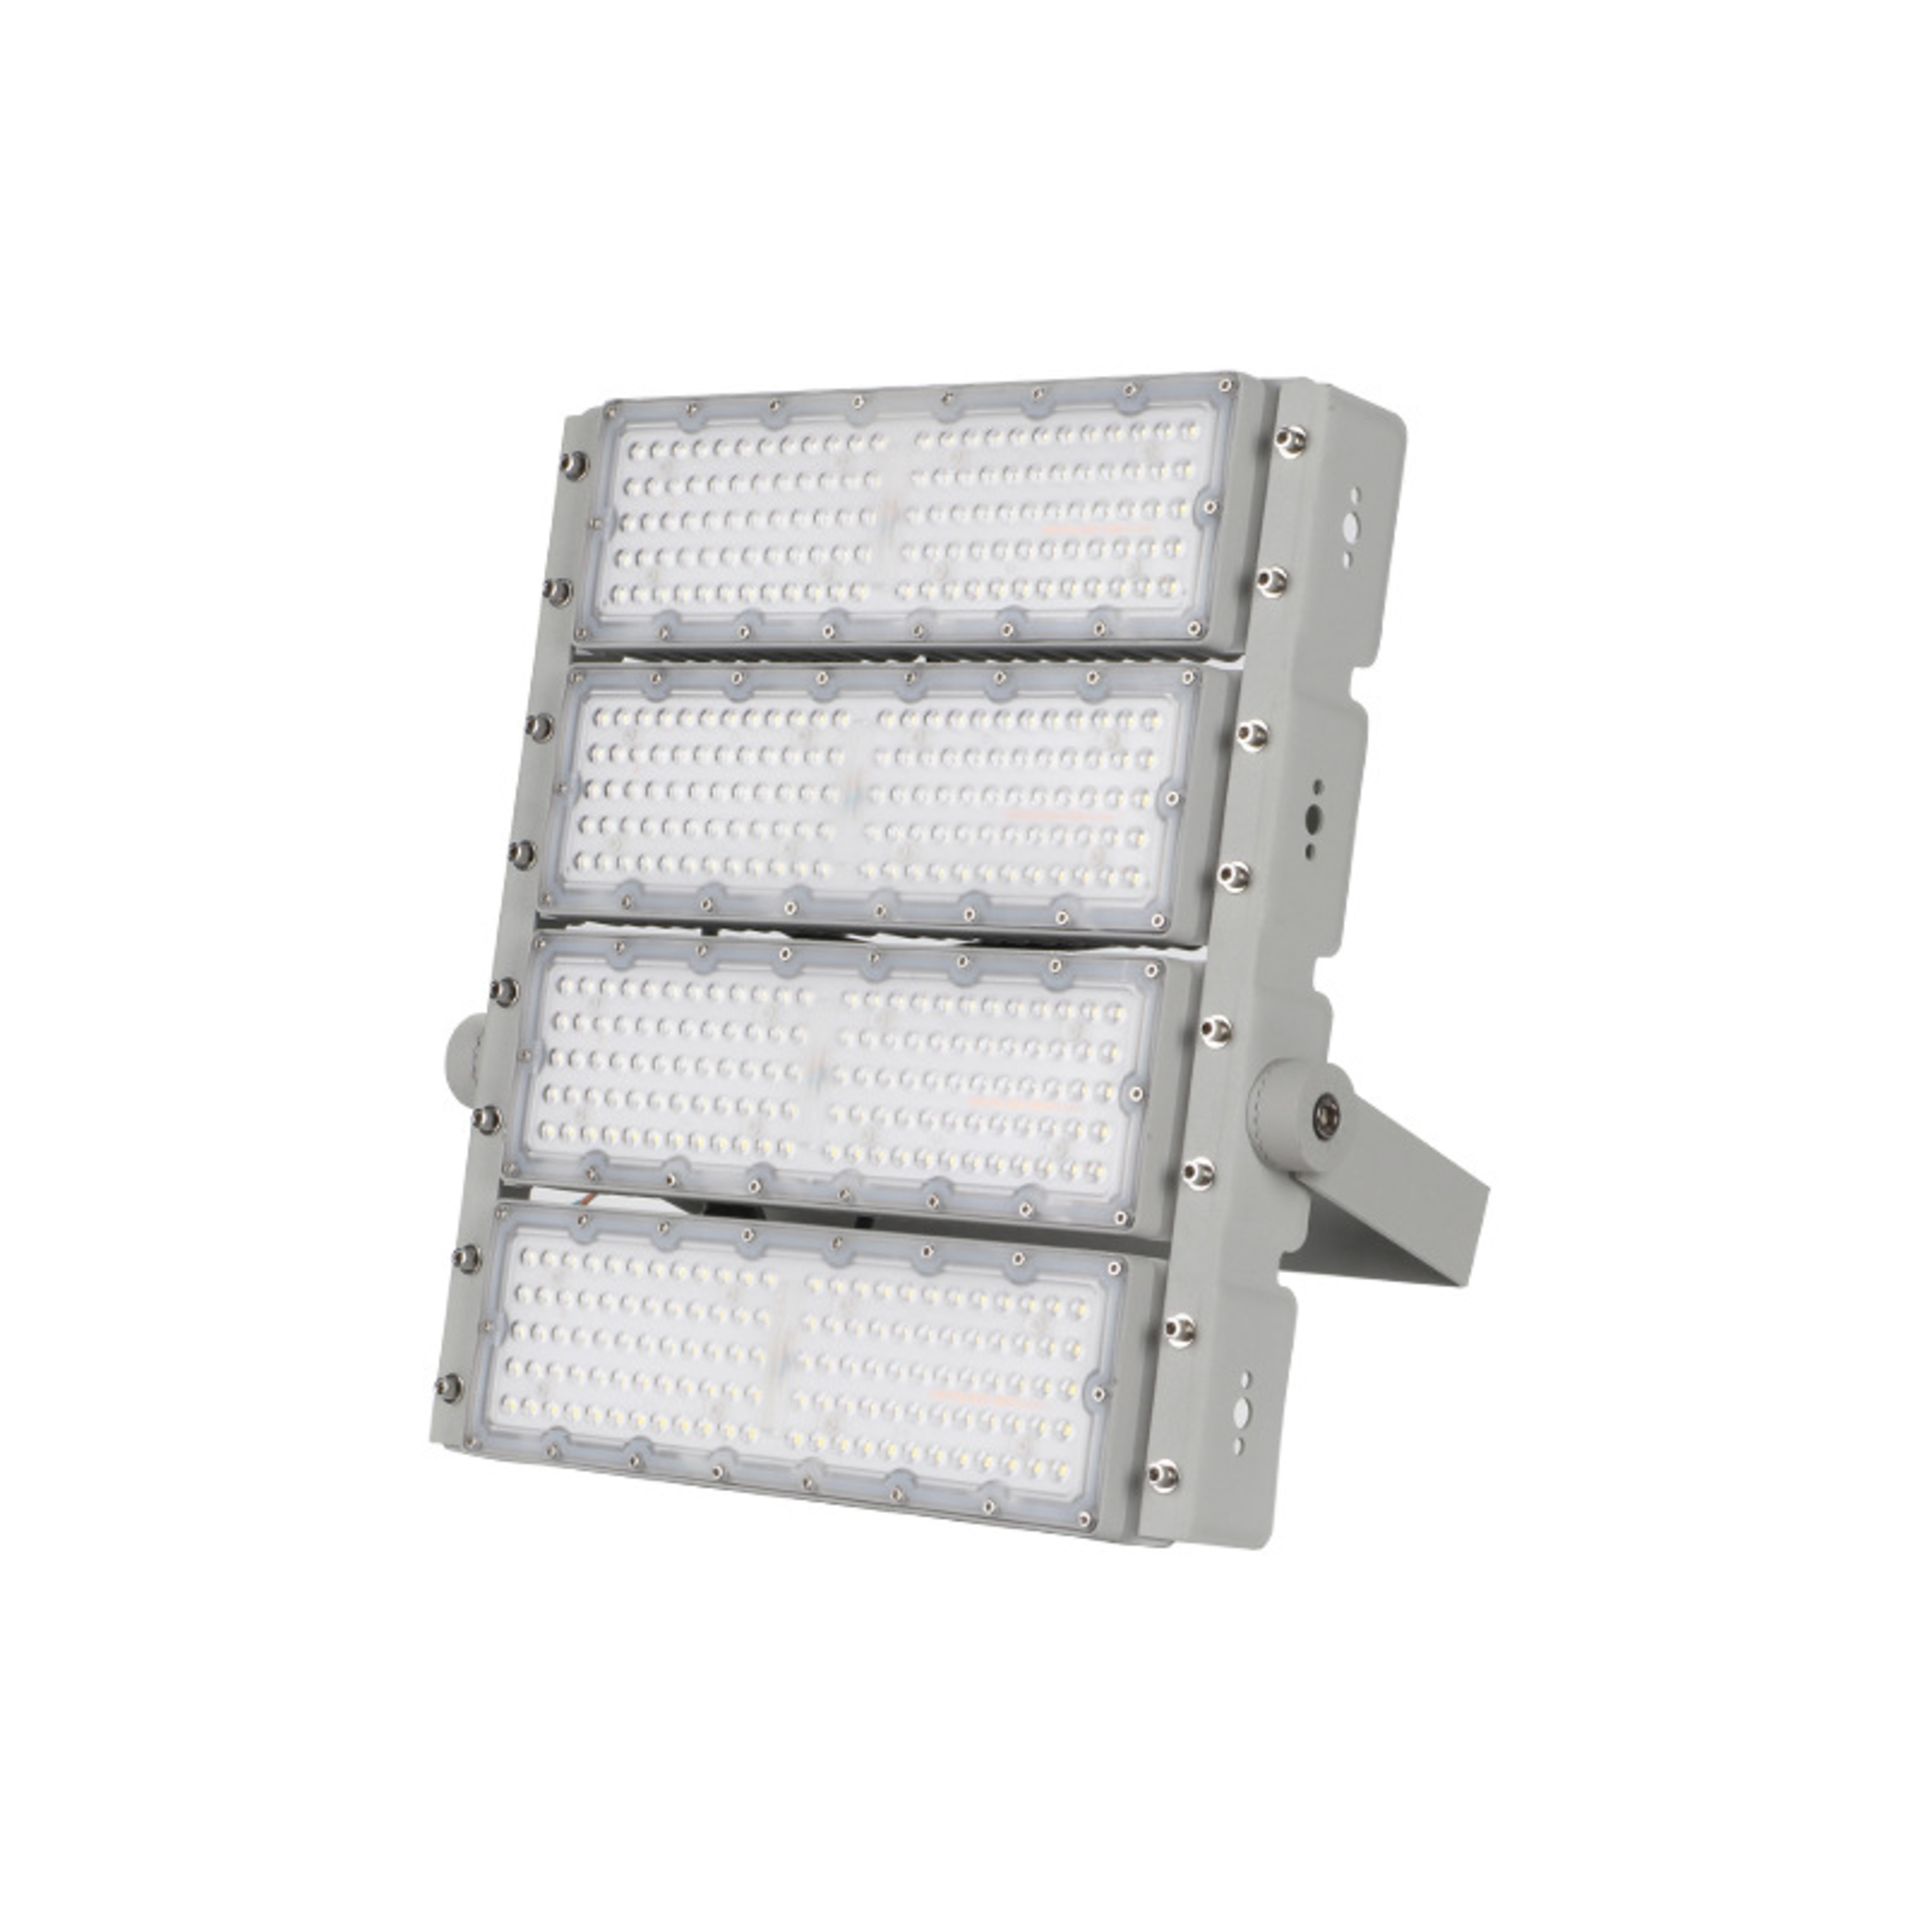 3 x LED400 Watt Flood Light Panel - For Car Parks, Security, Playing fields, Football pitches etc - Image 7 of 8